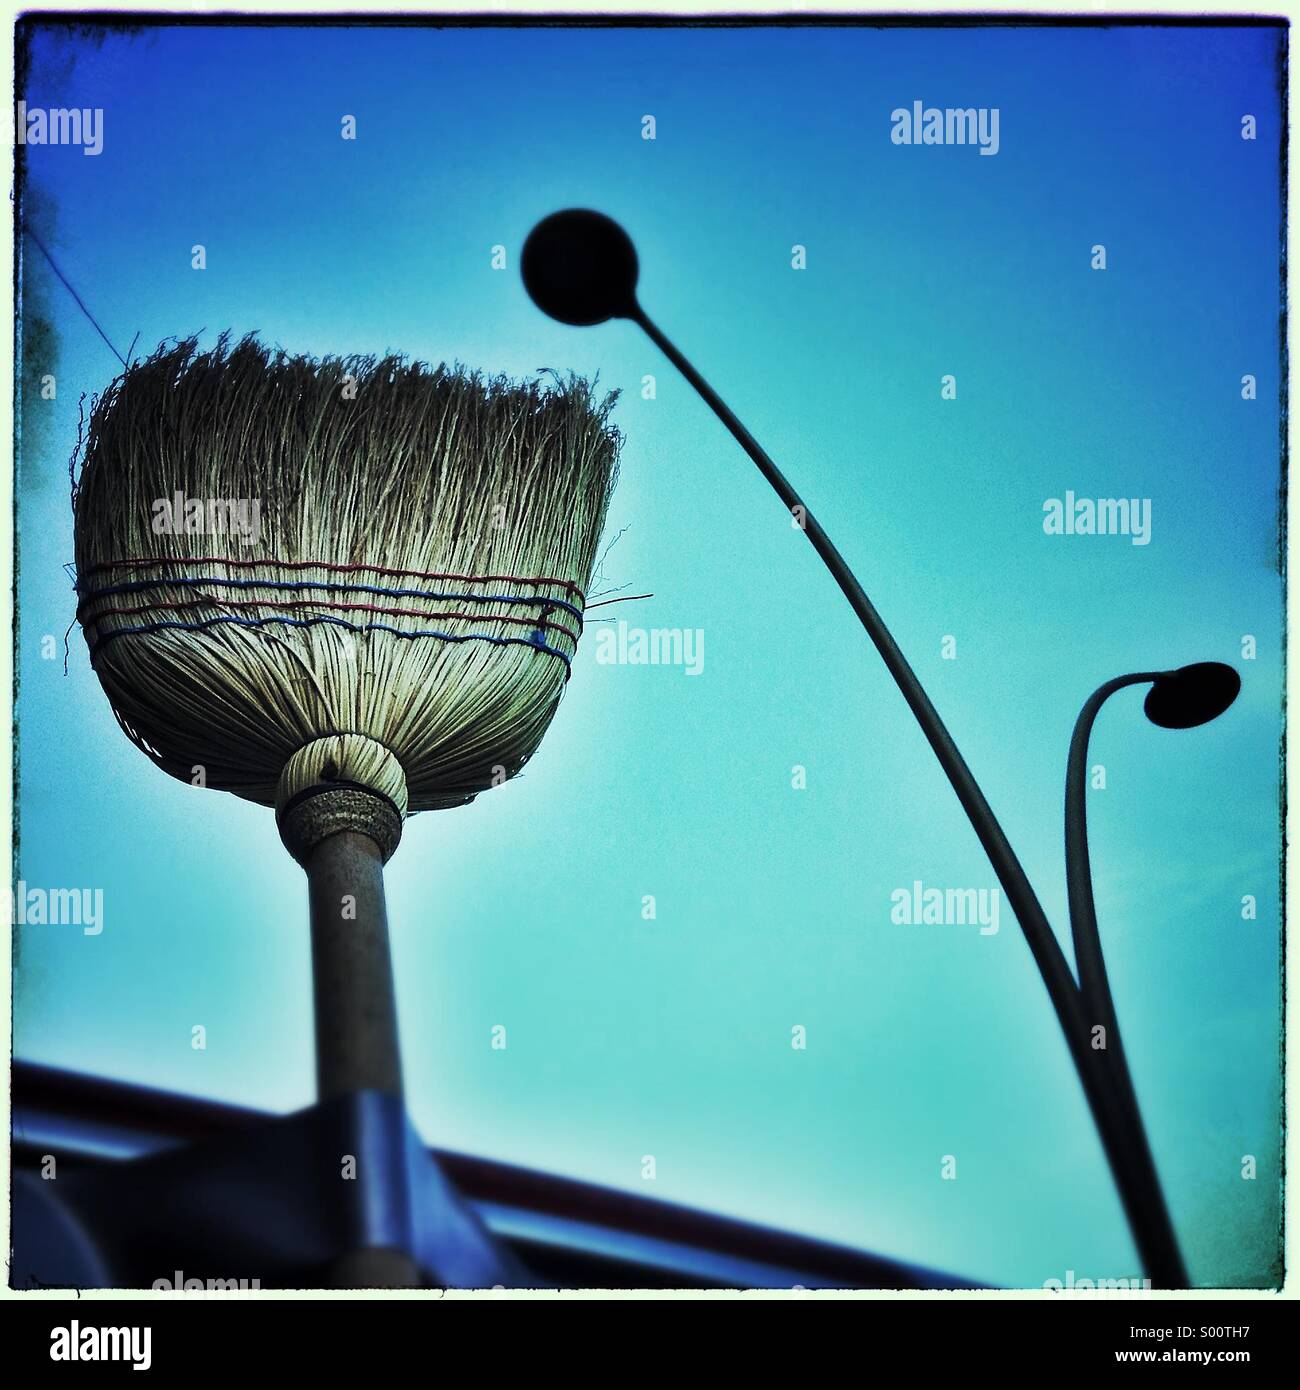 Broom and lamps posts Stock Photo